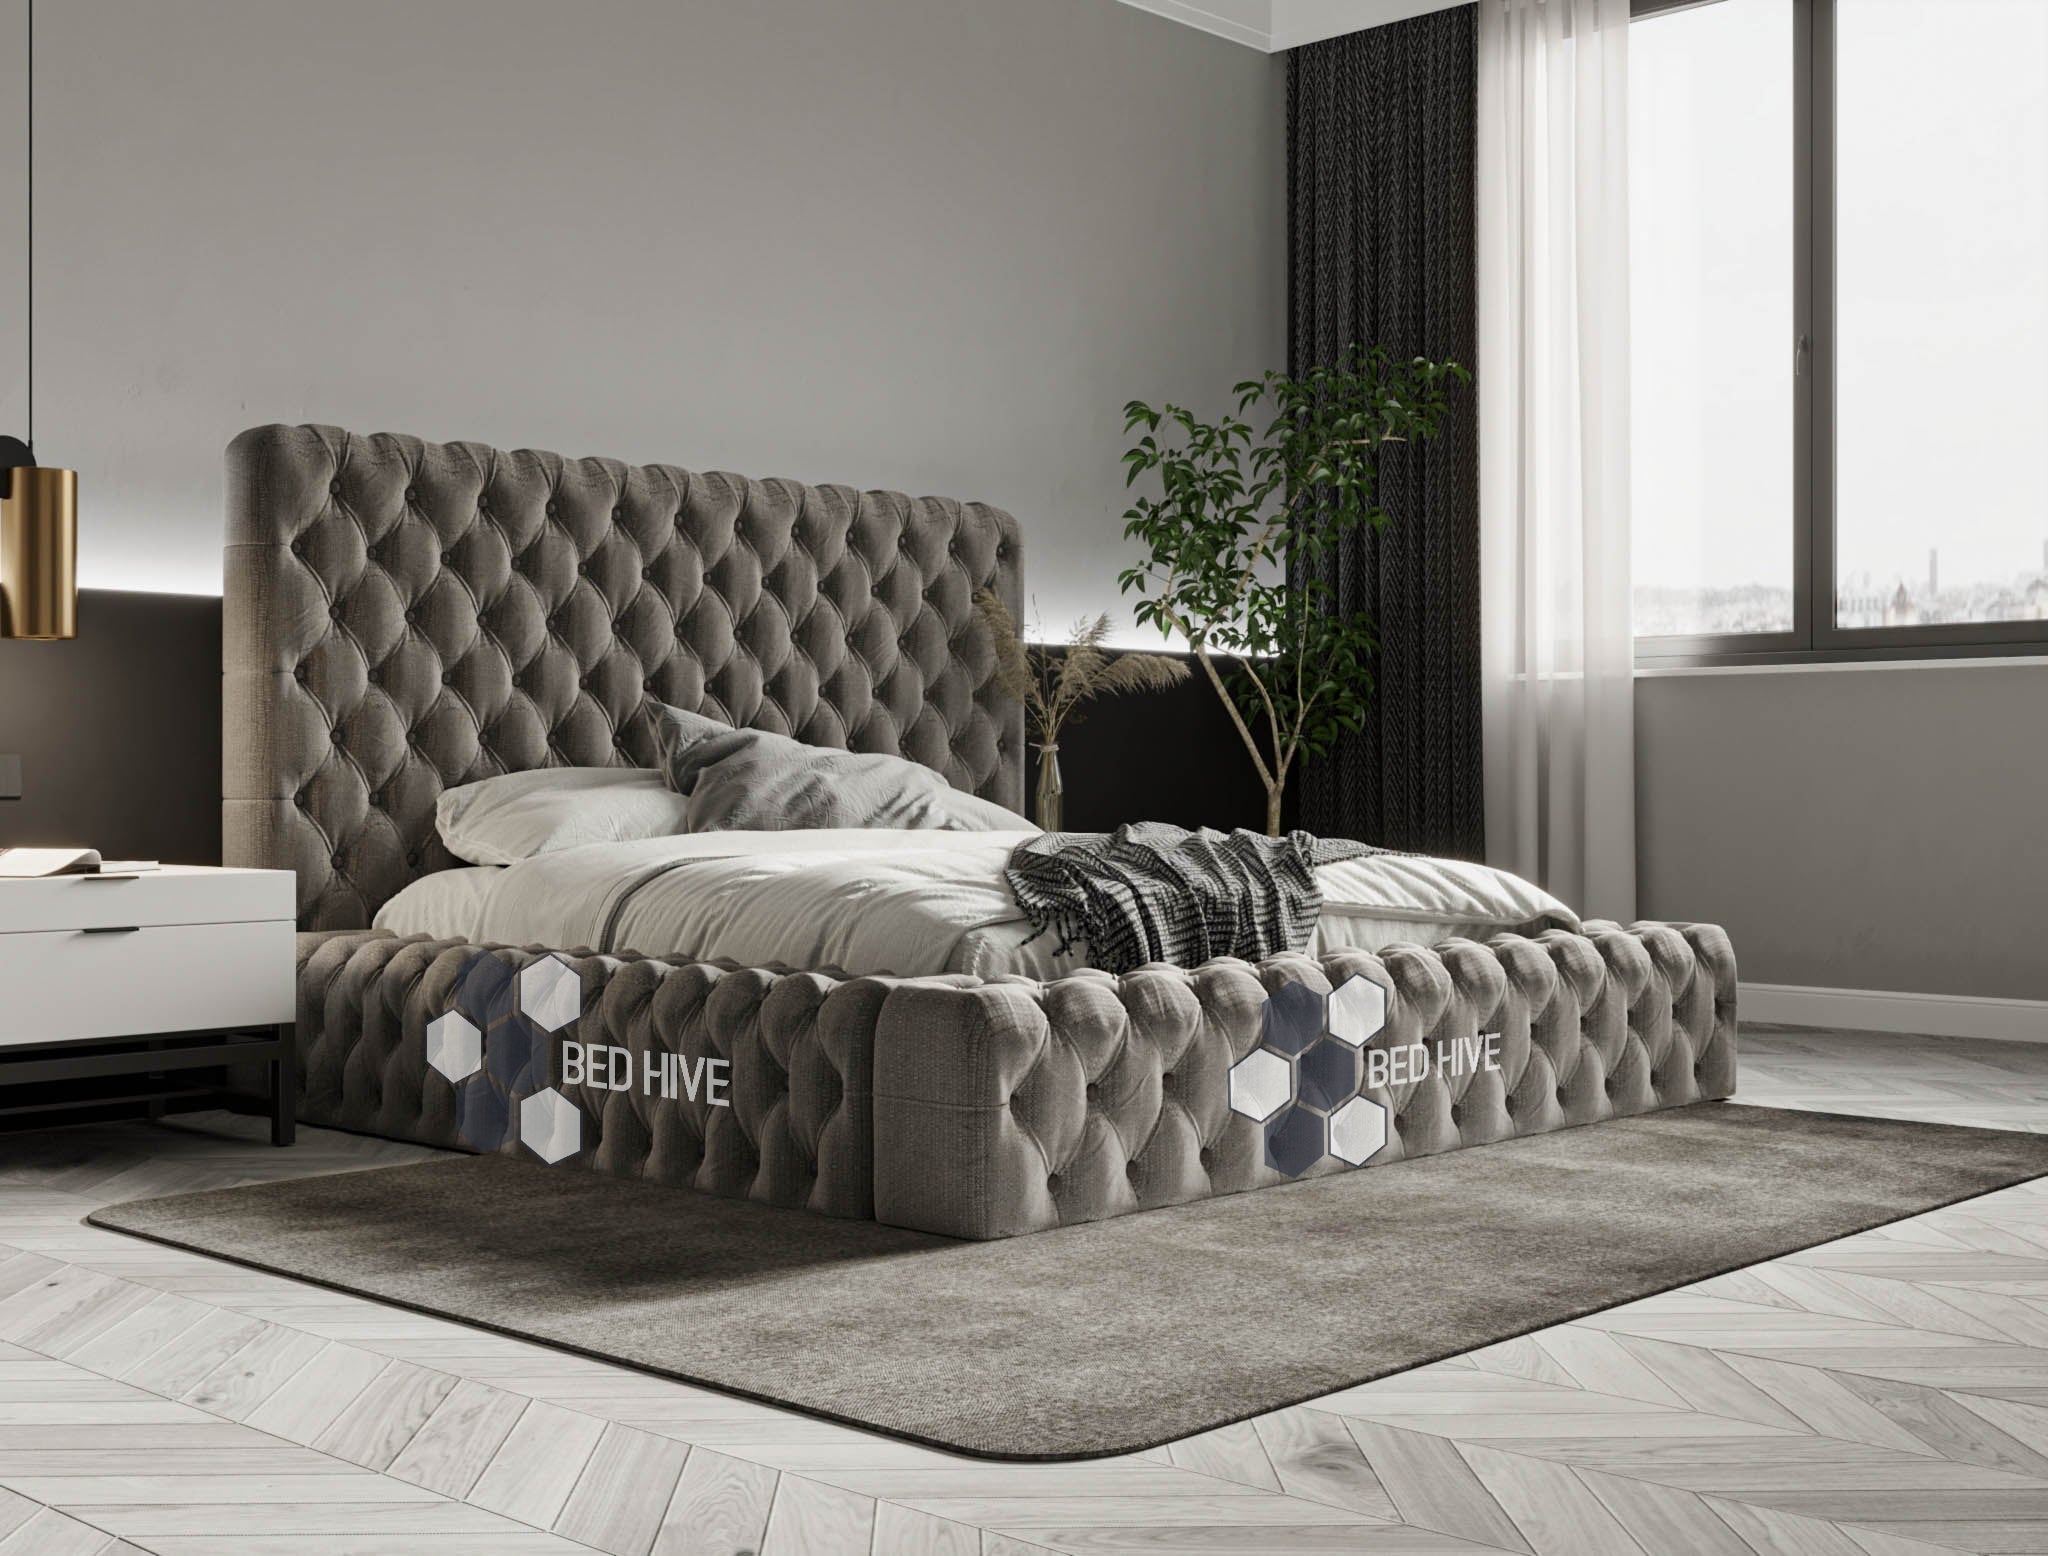 Ambassador Chesterfield Bed Frame, Chesterfield bed, Grey bed, bed frame, upholstered bed, new bed 